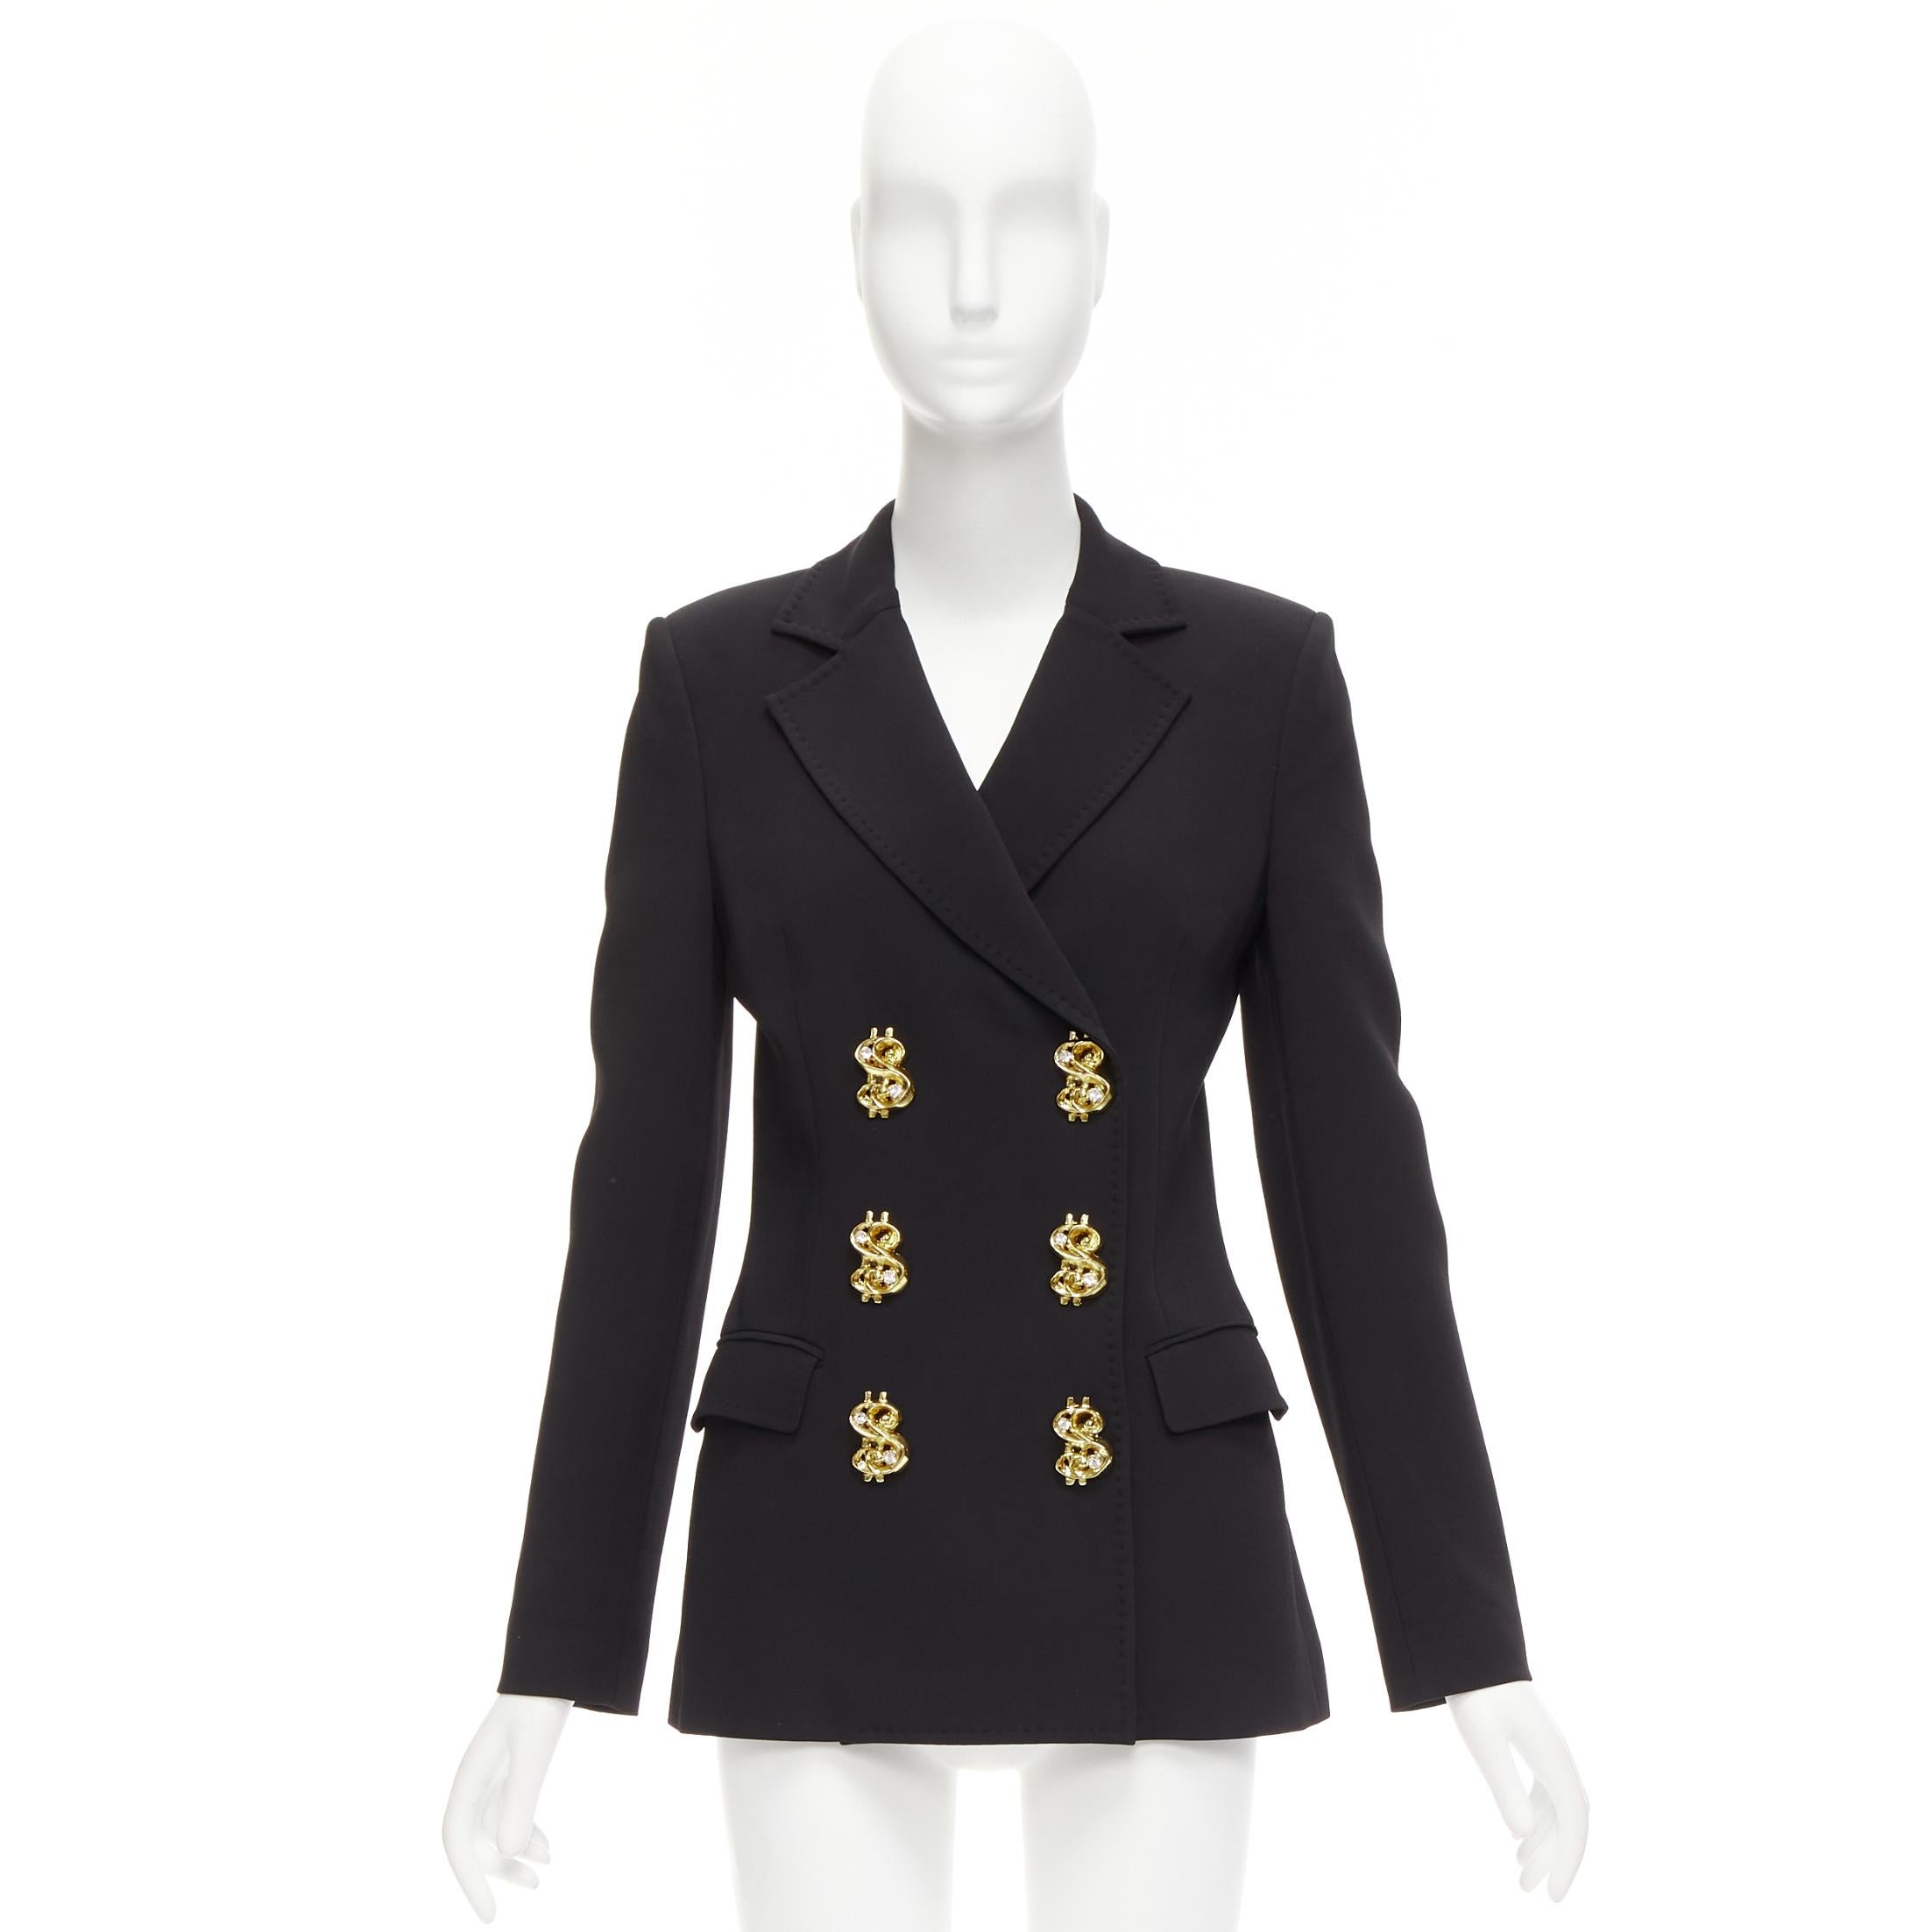 rare MOSCHINO Runway black gold crystal dollar sign button blazer jacket IT40 S For Sale 6